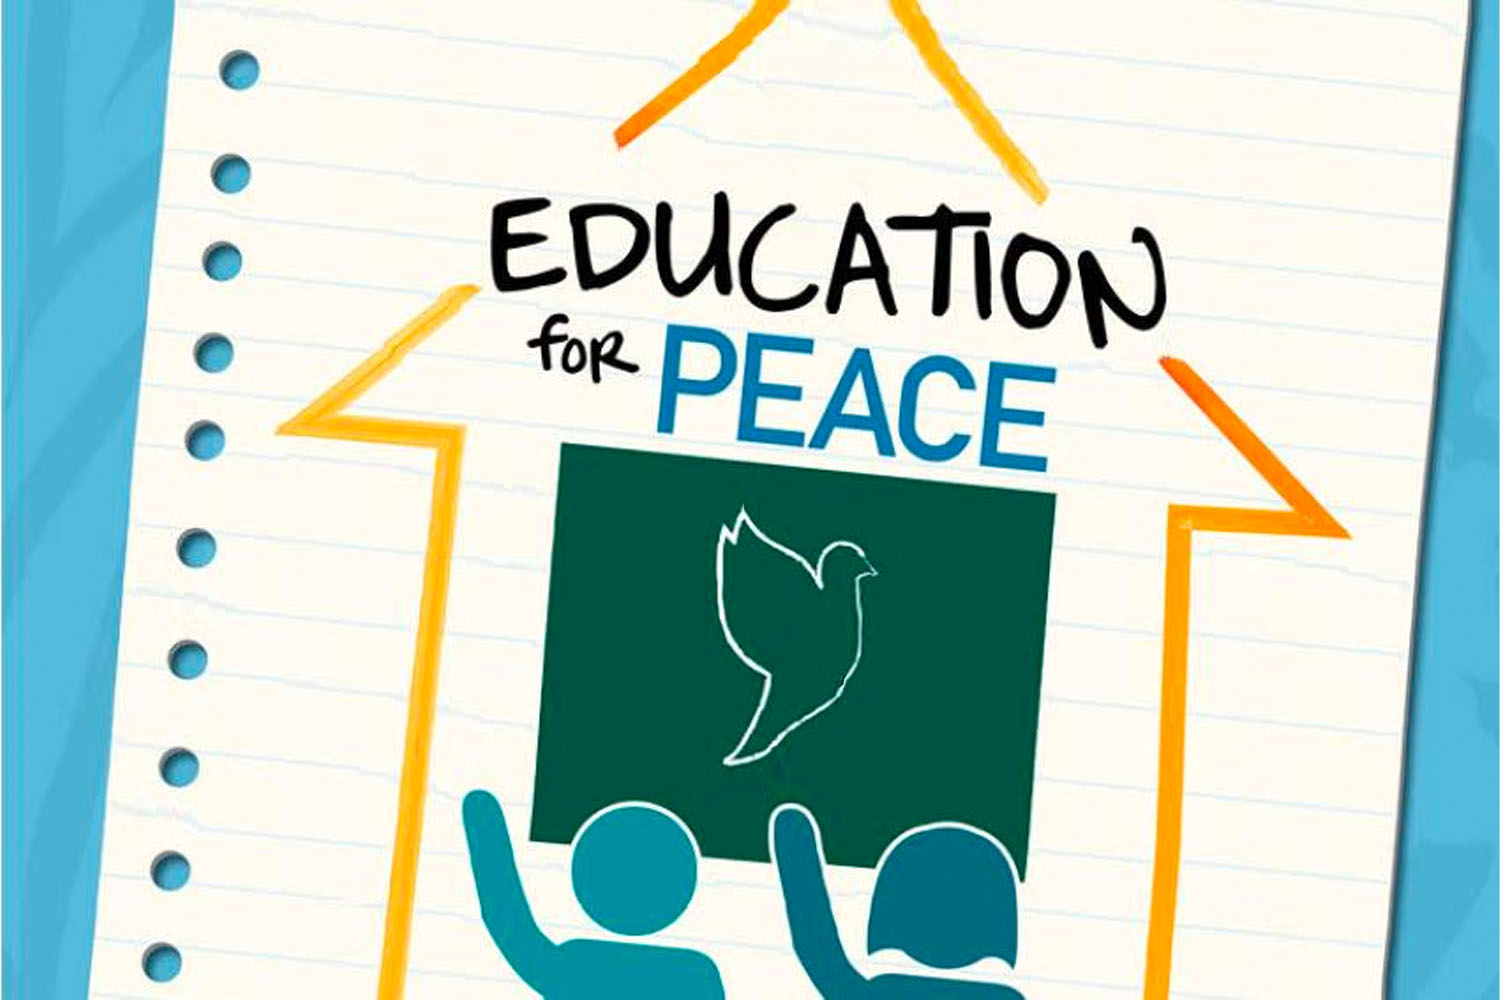 Education for Peace